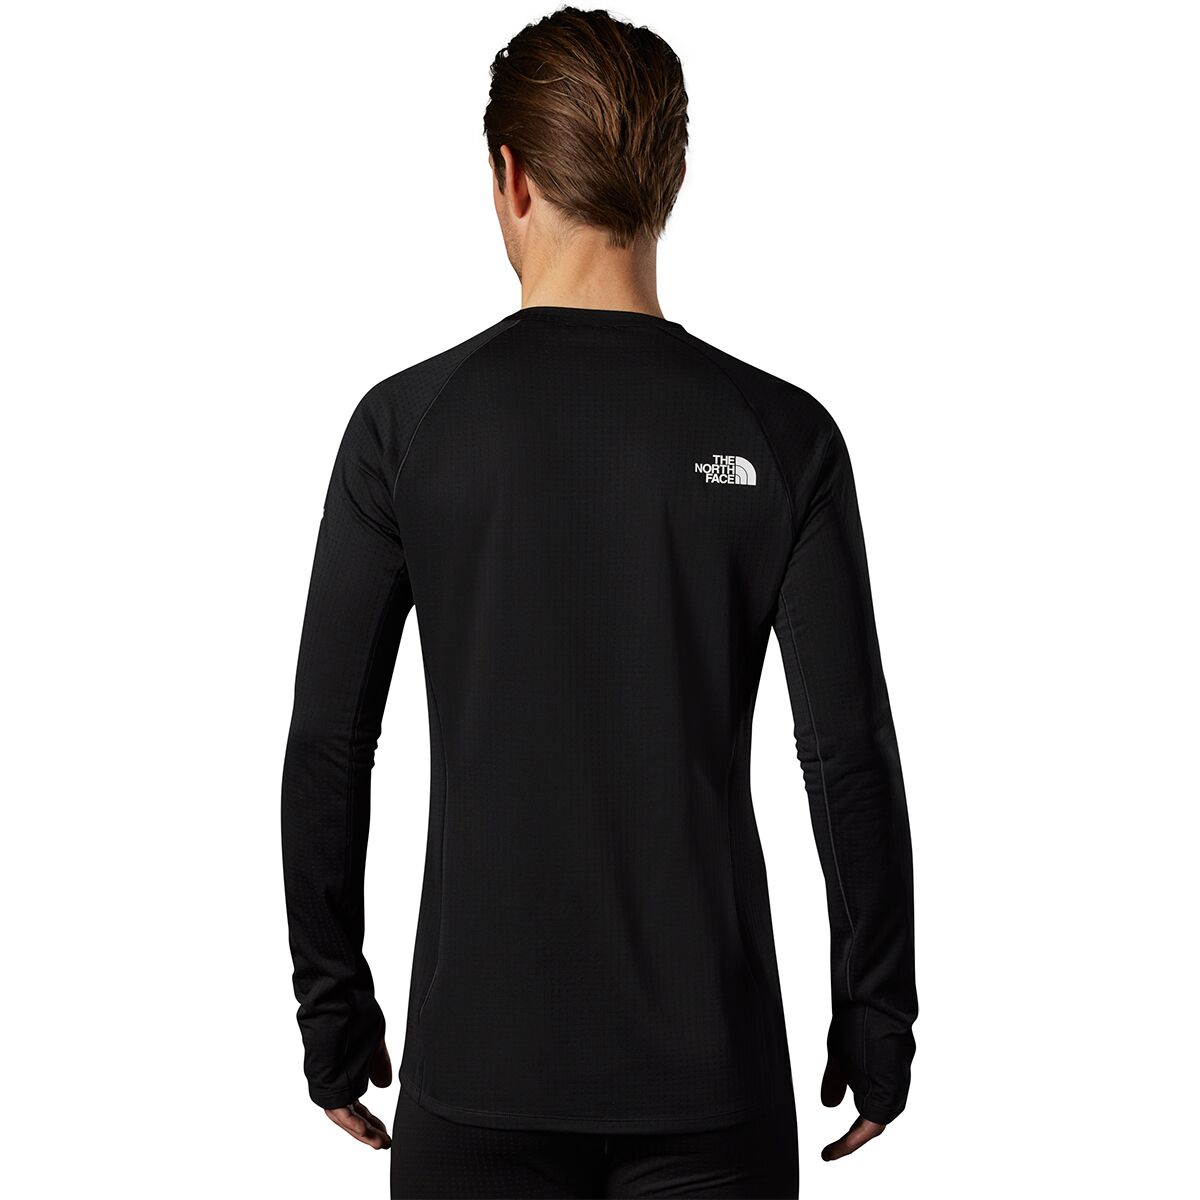 The North Face Summit Pro 120 Crew - Men's - Clothing